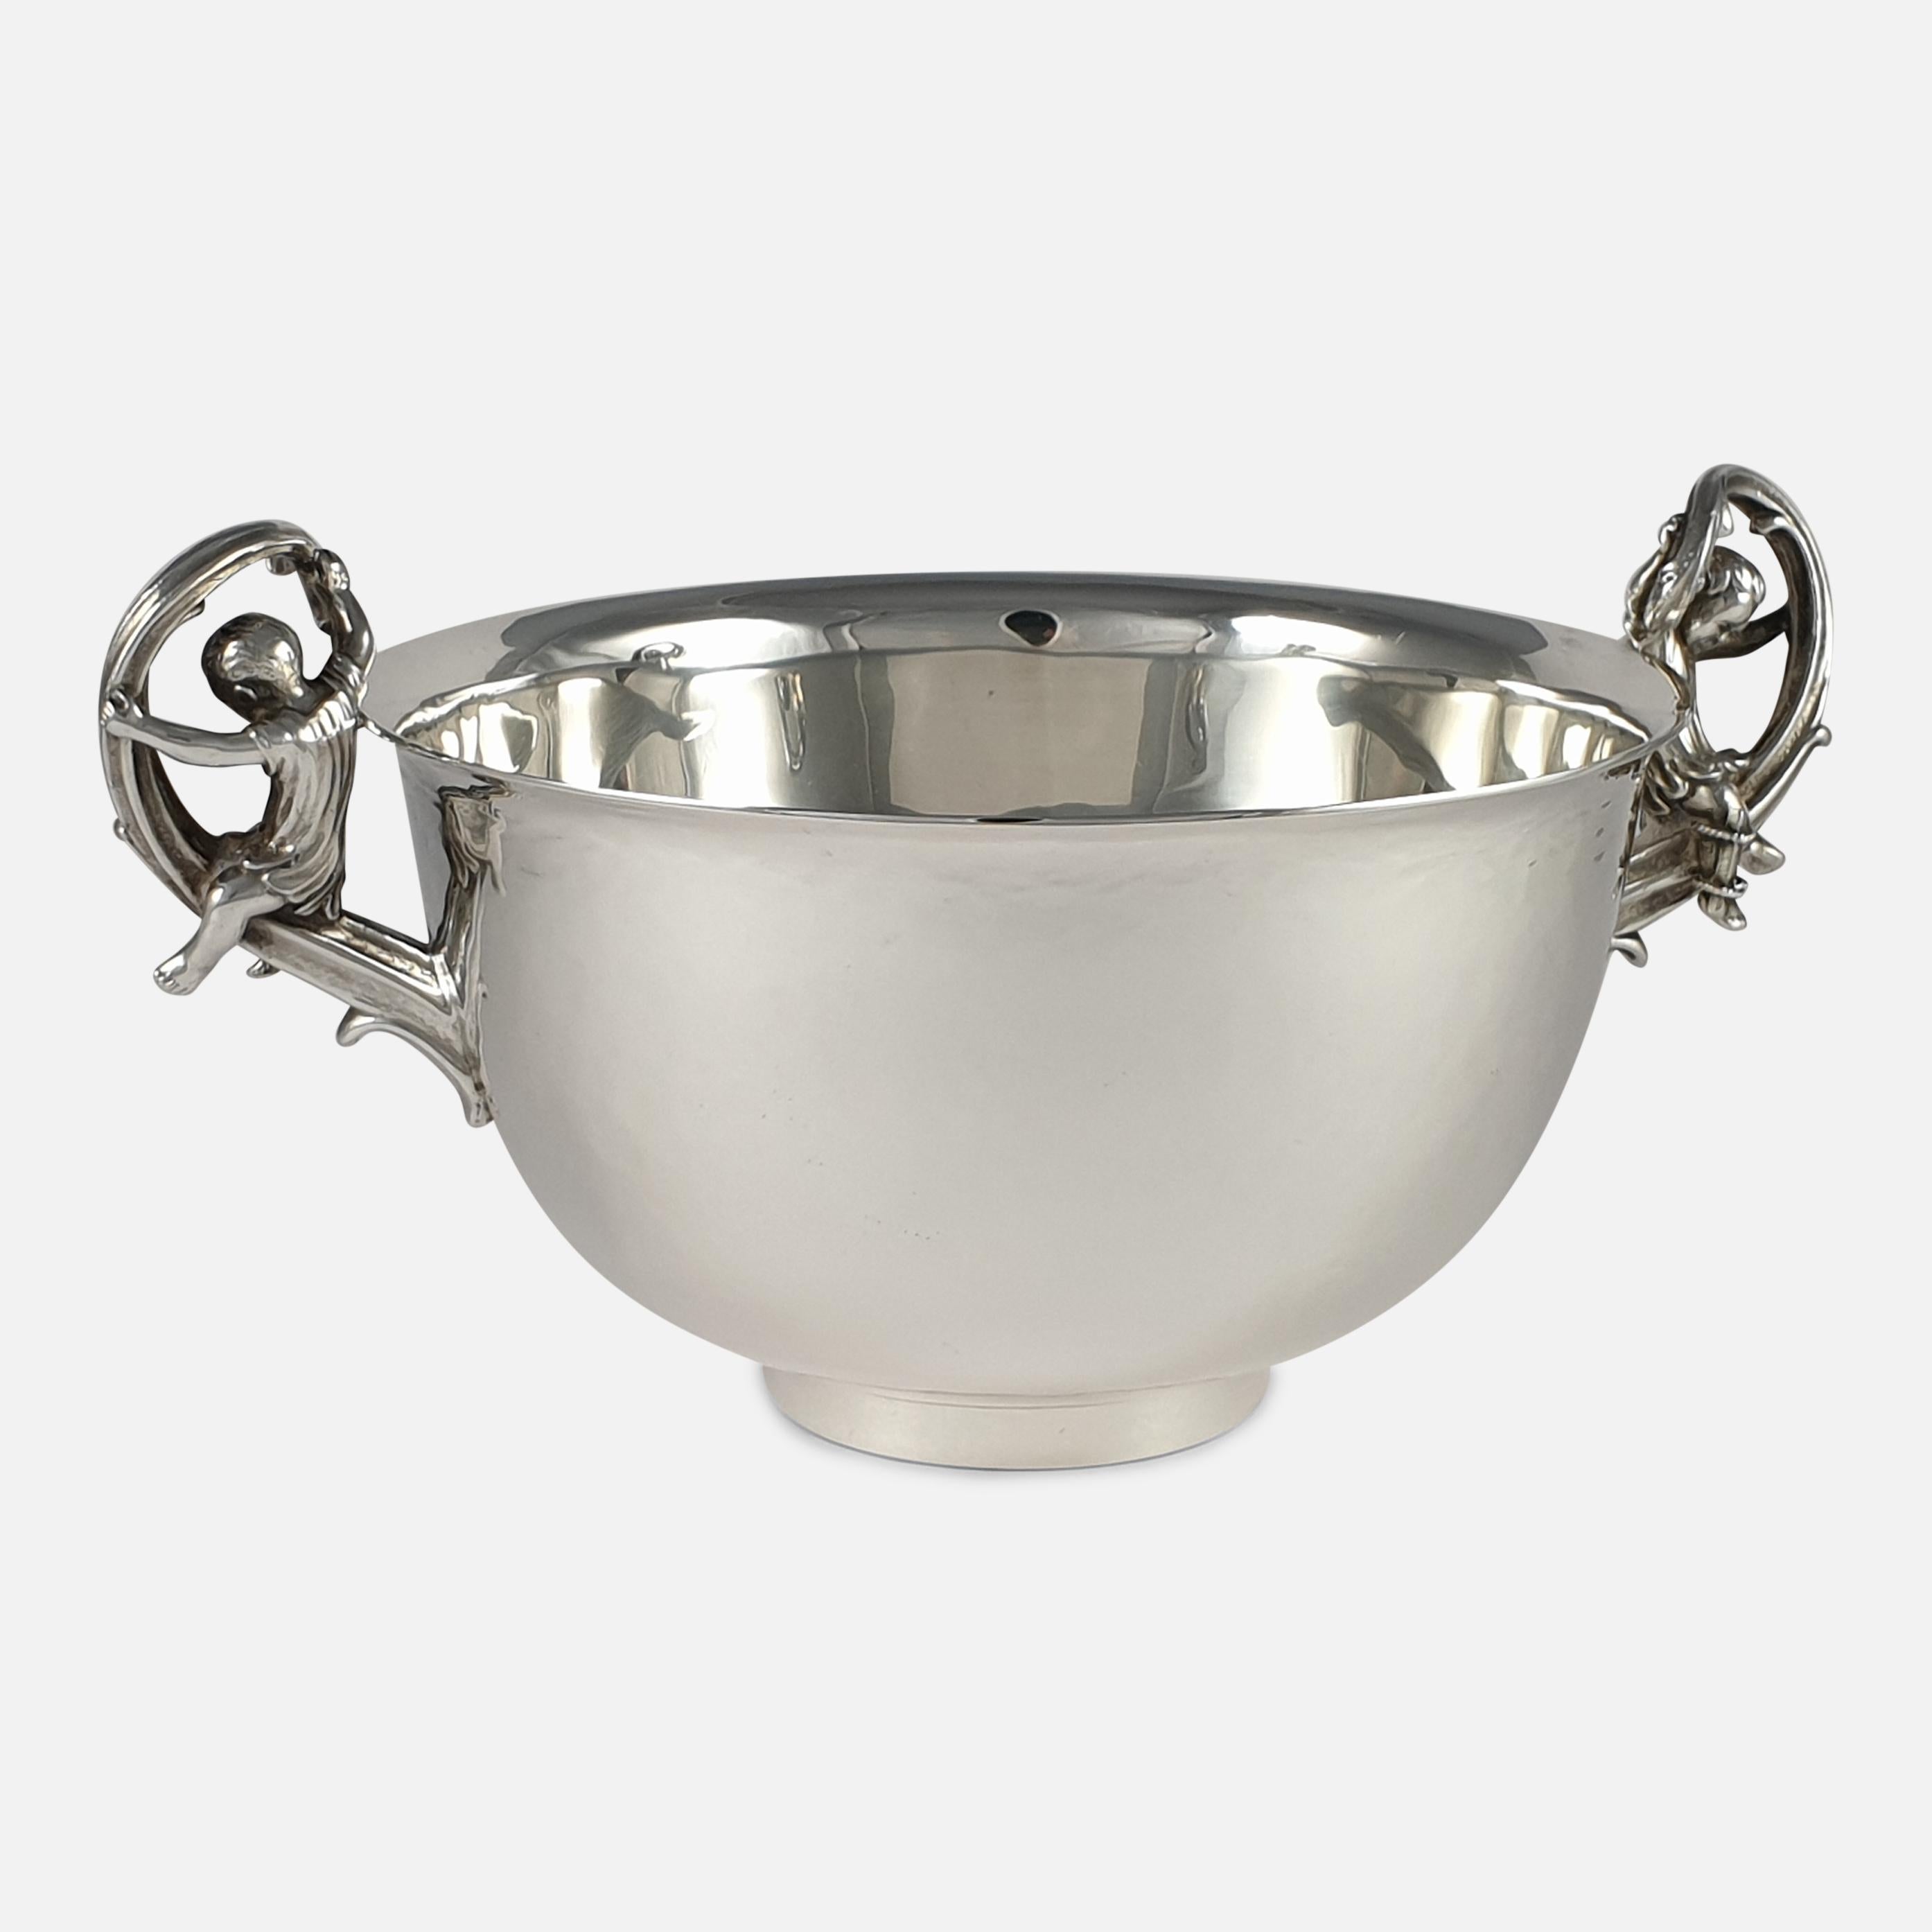 Late 20th Century Sterling Silver Twin-Handled Bowl, Leslie G. Durbin, London, 1982 For Sale